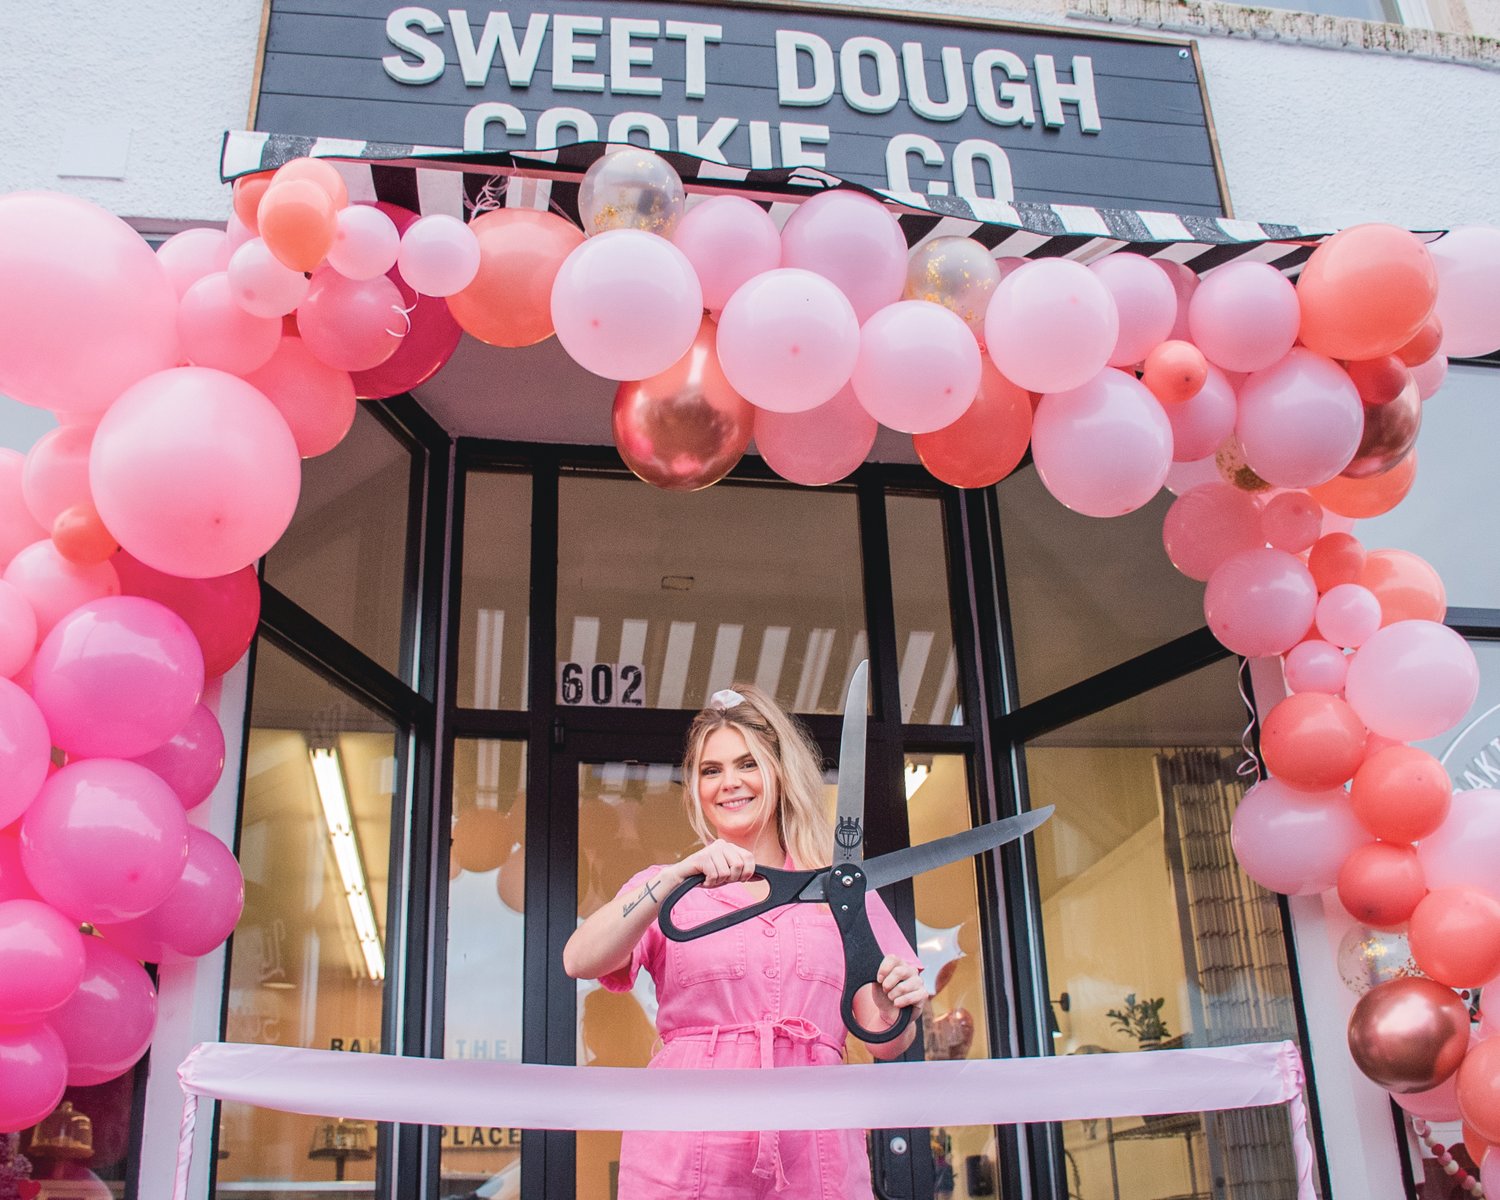 Ashlee Shirer, owner of Sweet Dough Cookie Co., smiles while holding a pair of scissors outside her Centralia storefront during a ribbon cutting ceremony Saturday morning.